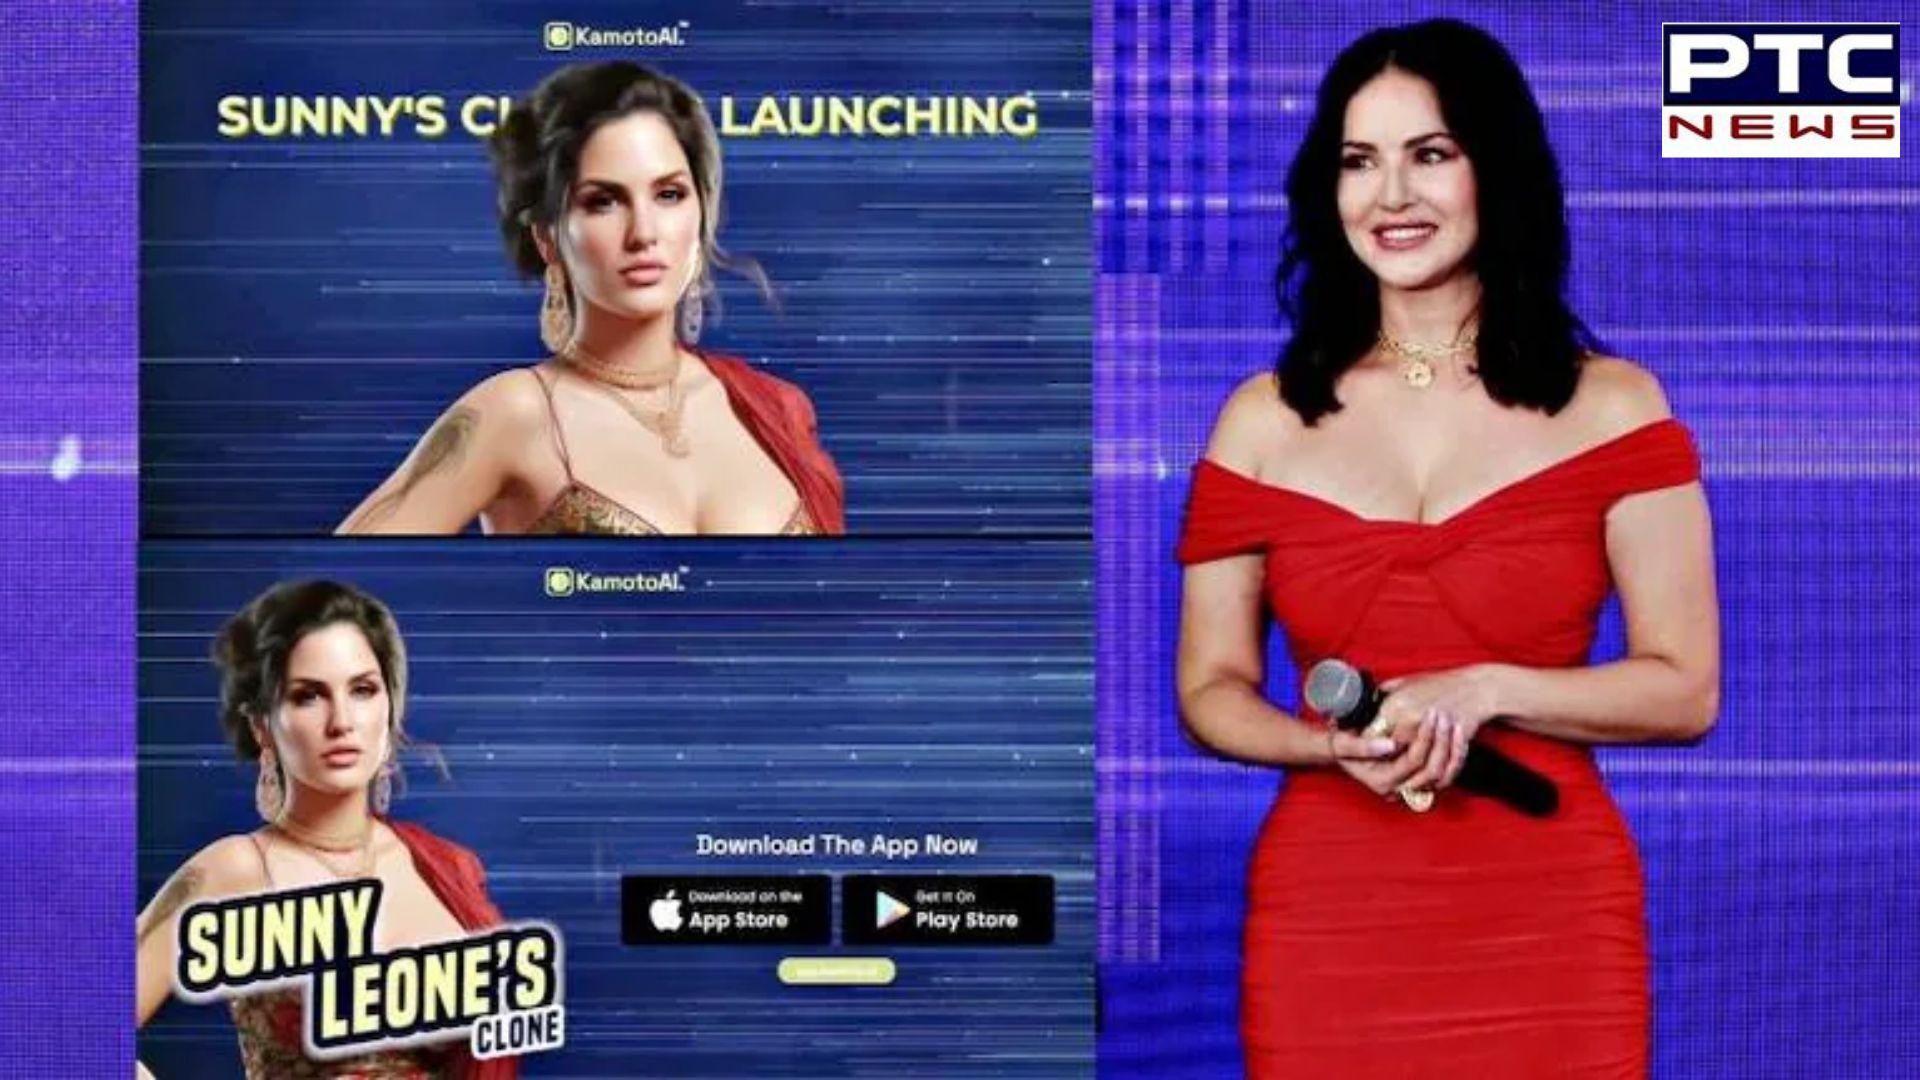 Now you can chat, video call with Sunny Leone, this is how